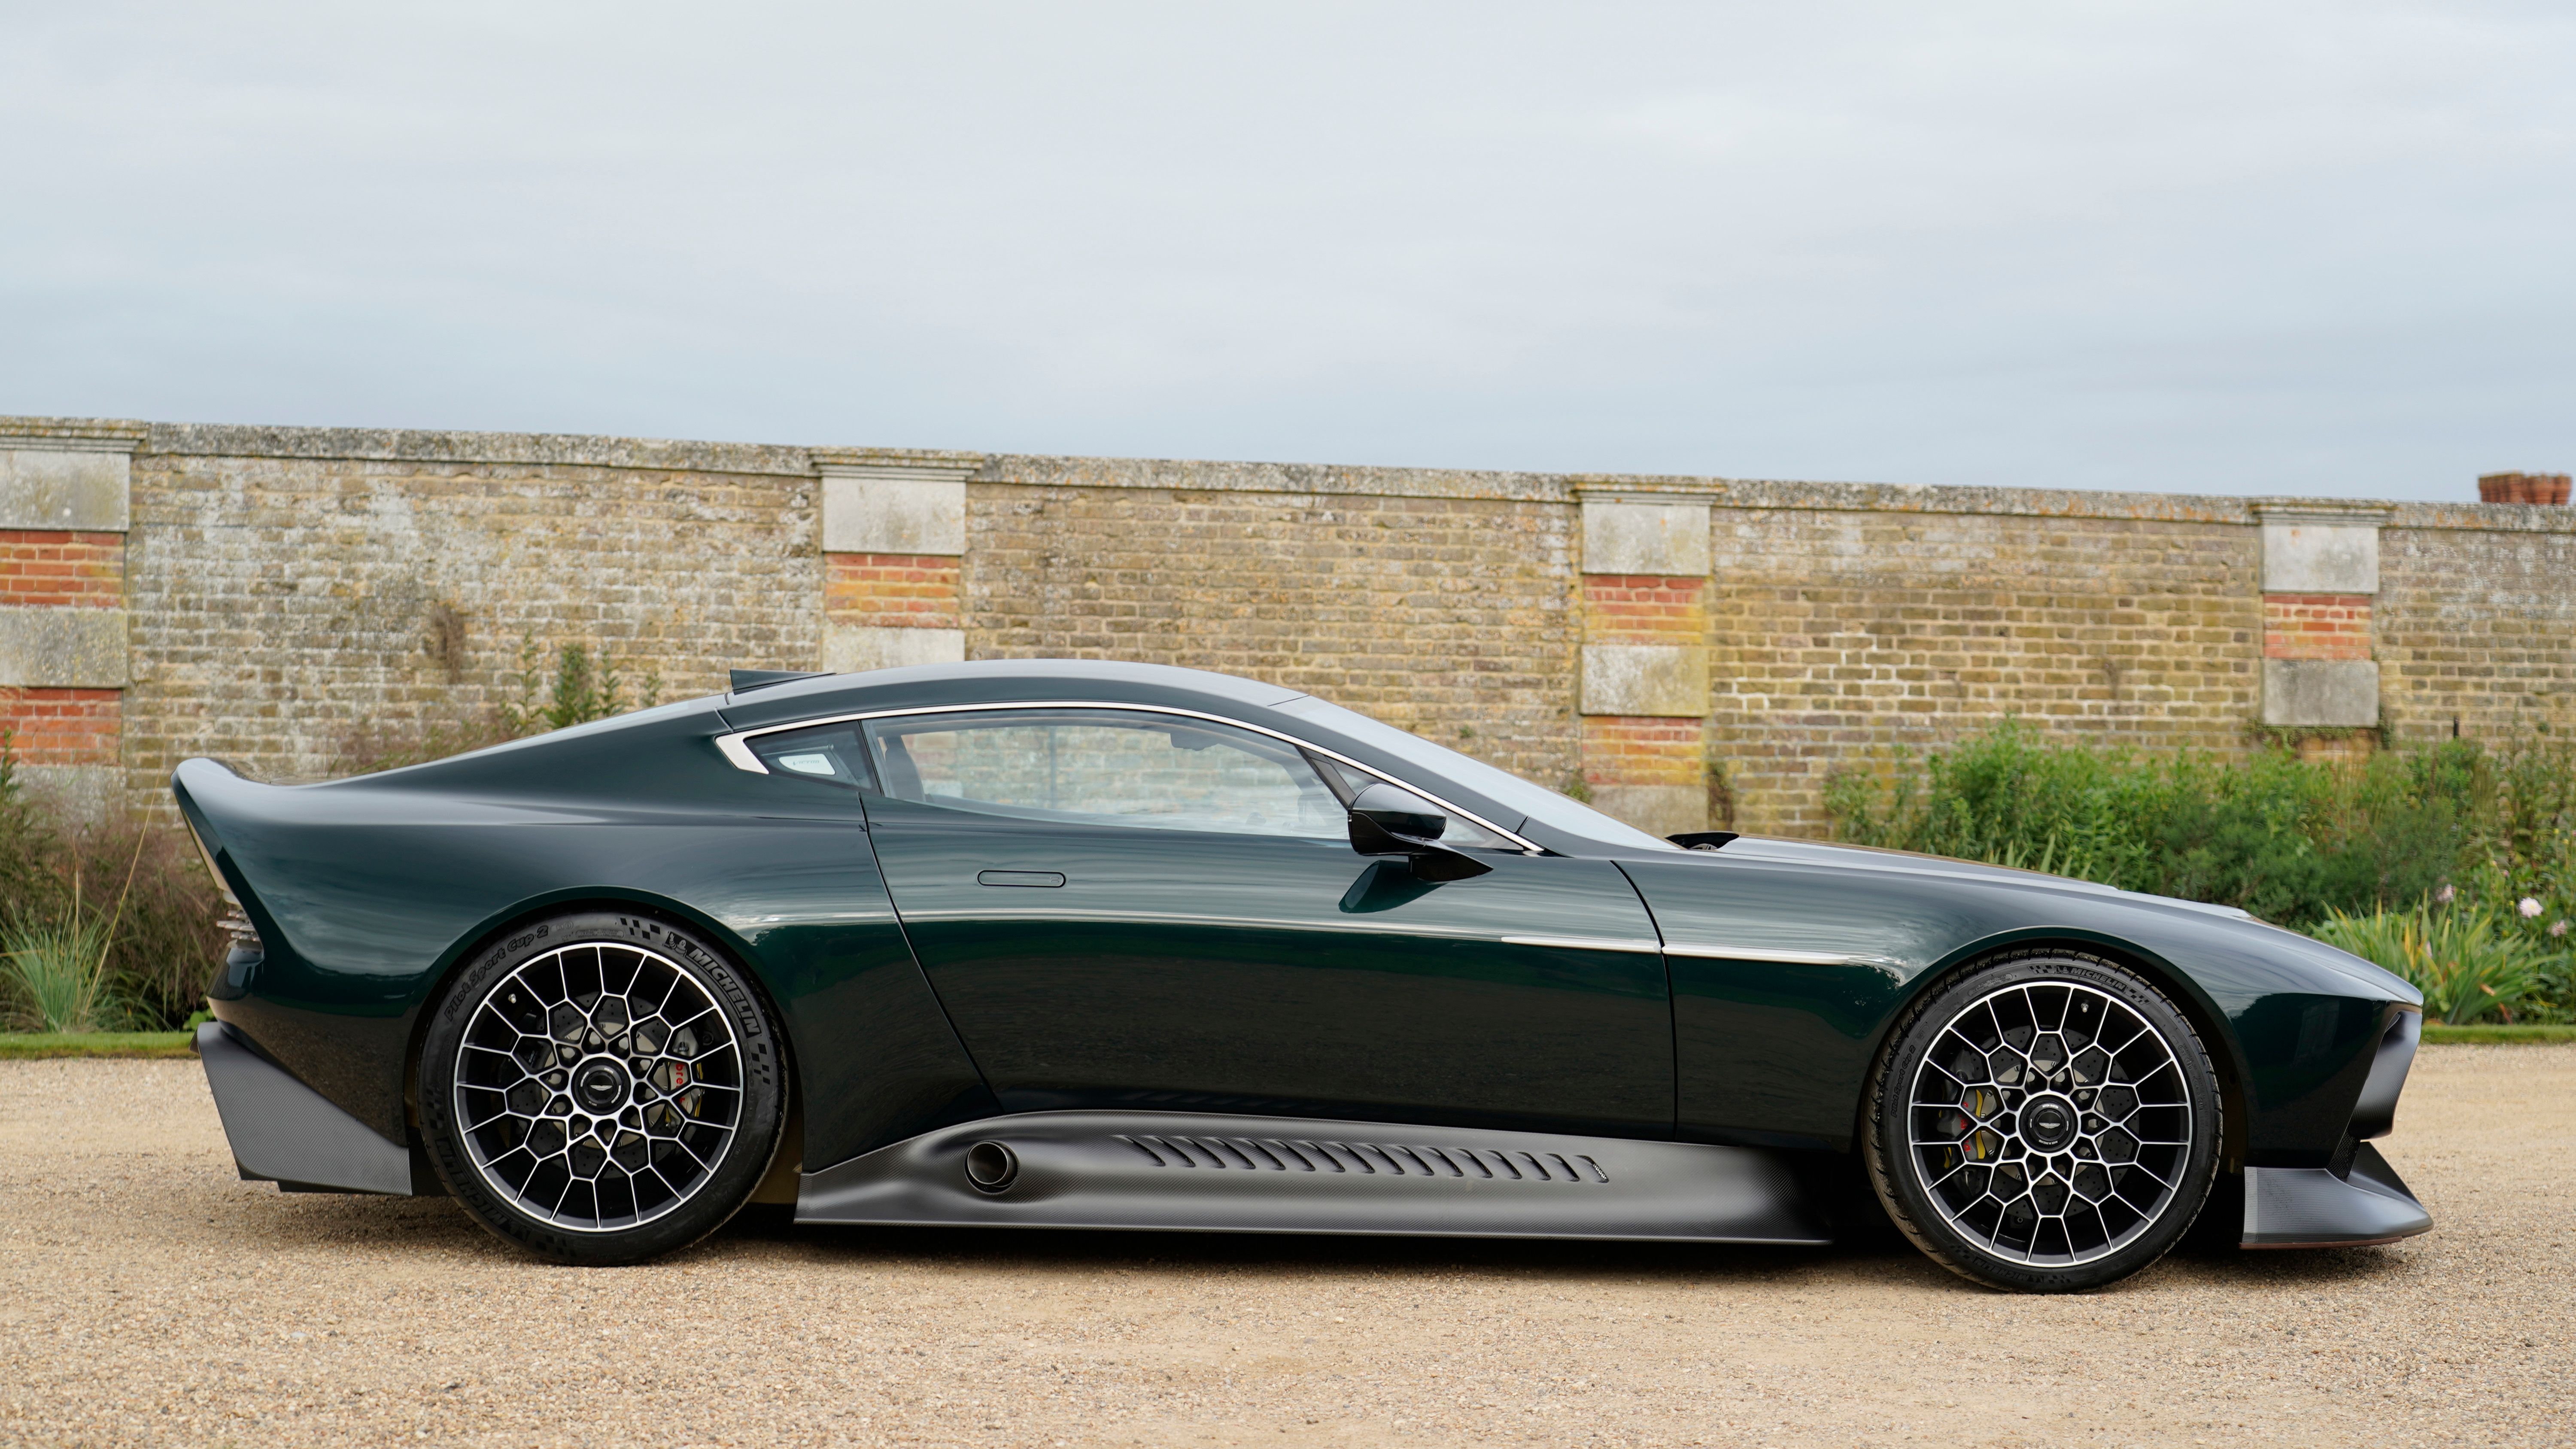 Aston Martin Victor: 1 of 1 Hypercar Built from Vulcan and One-77